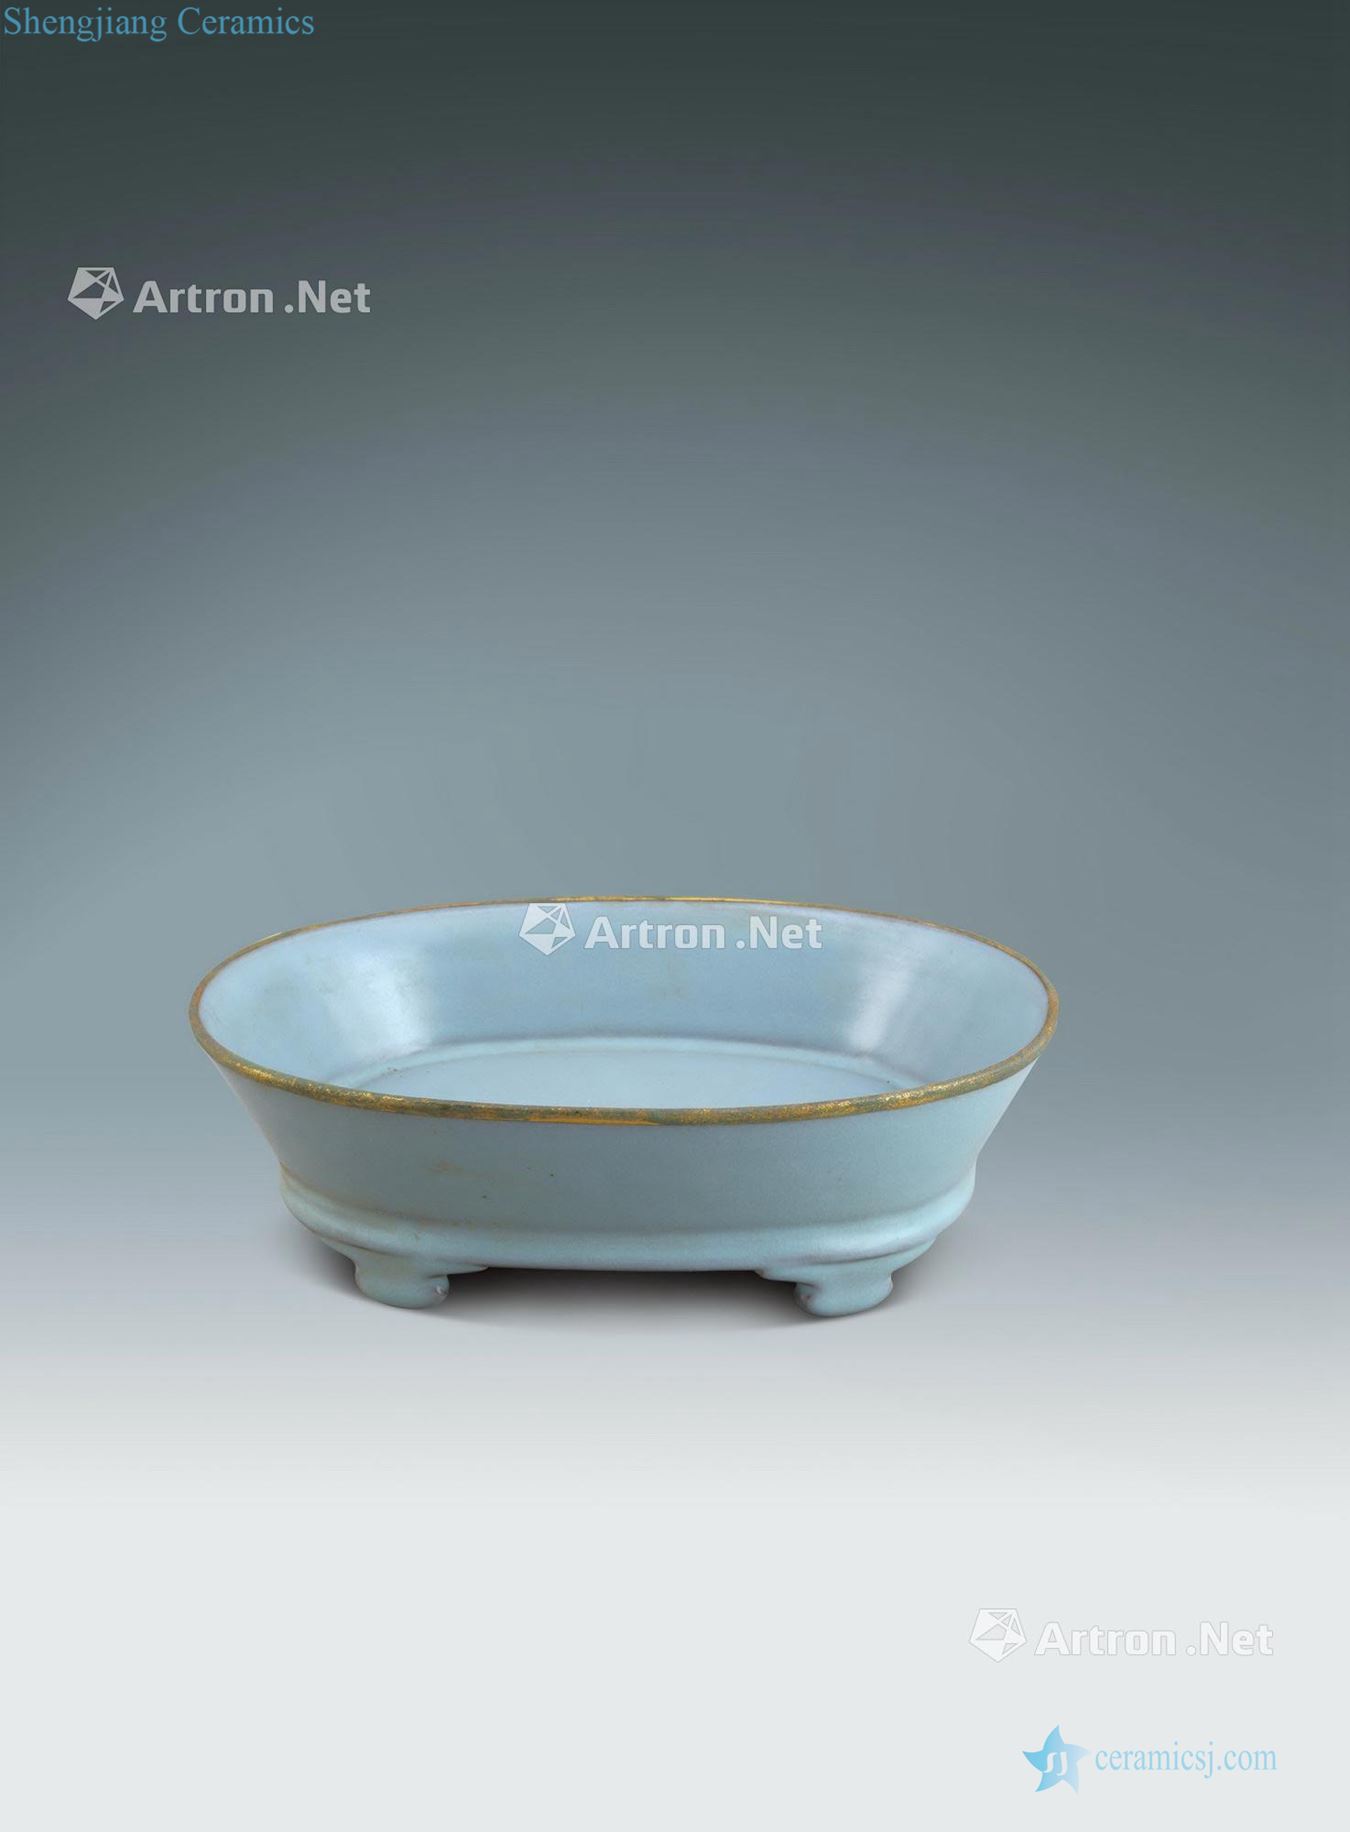 The song dynasty Your kiln narcissus basin